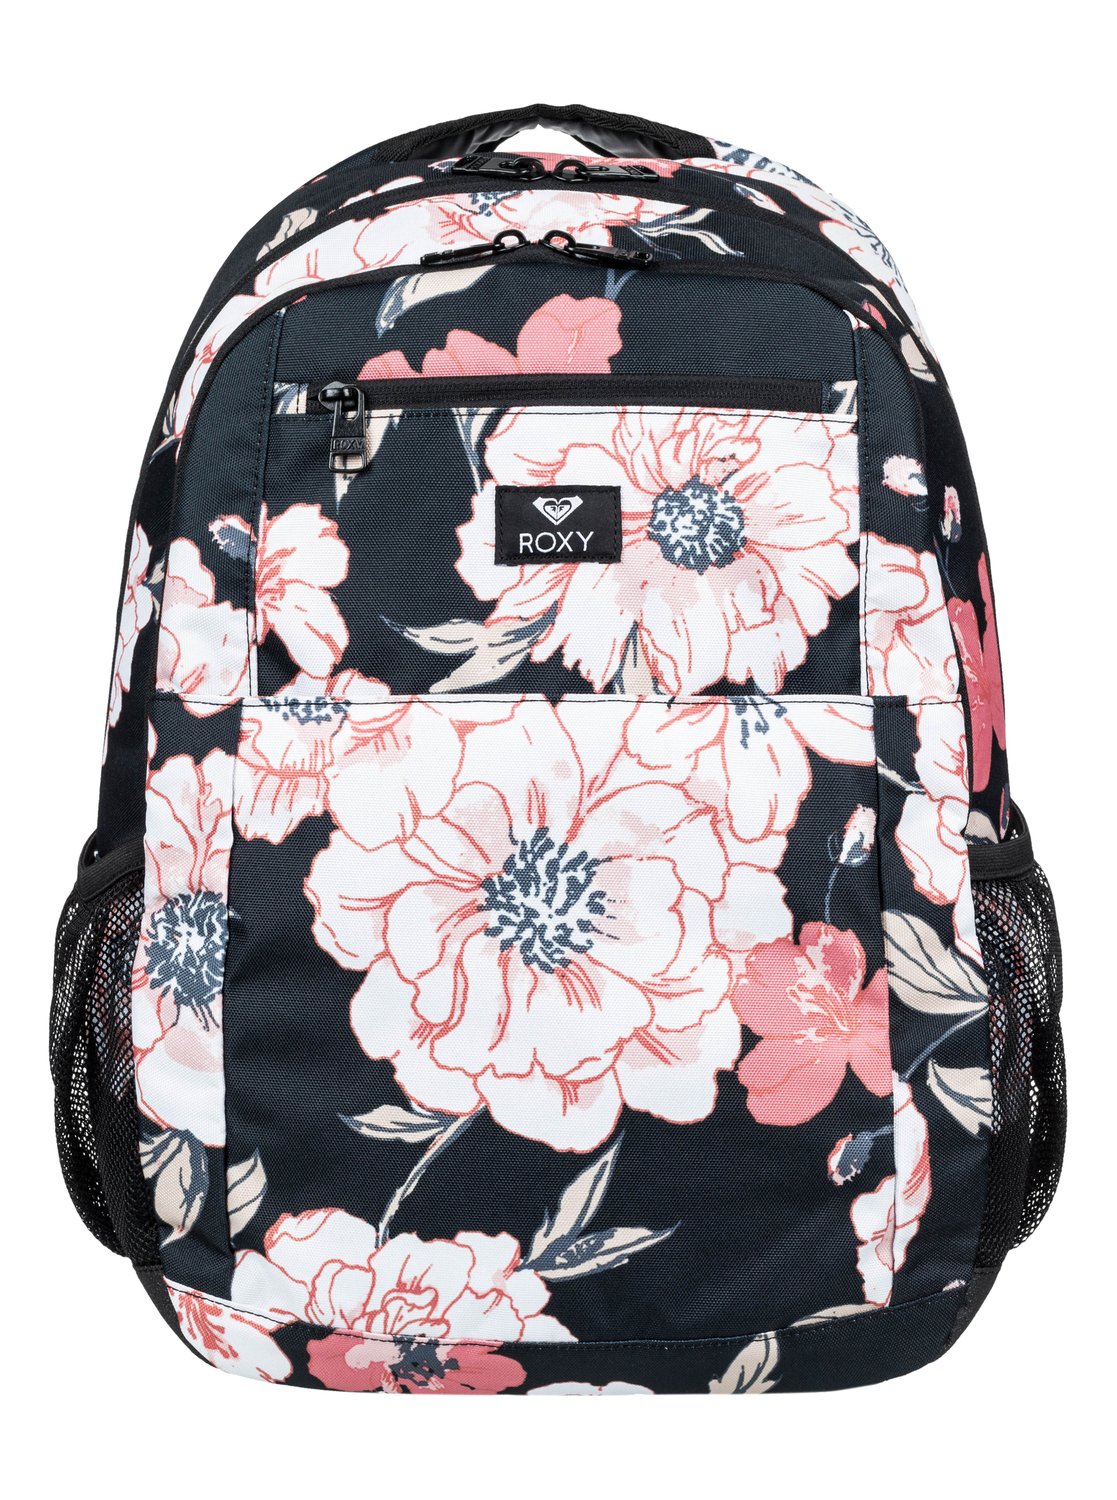 Roxy Here You Are Backpack KVJ7 OS